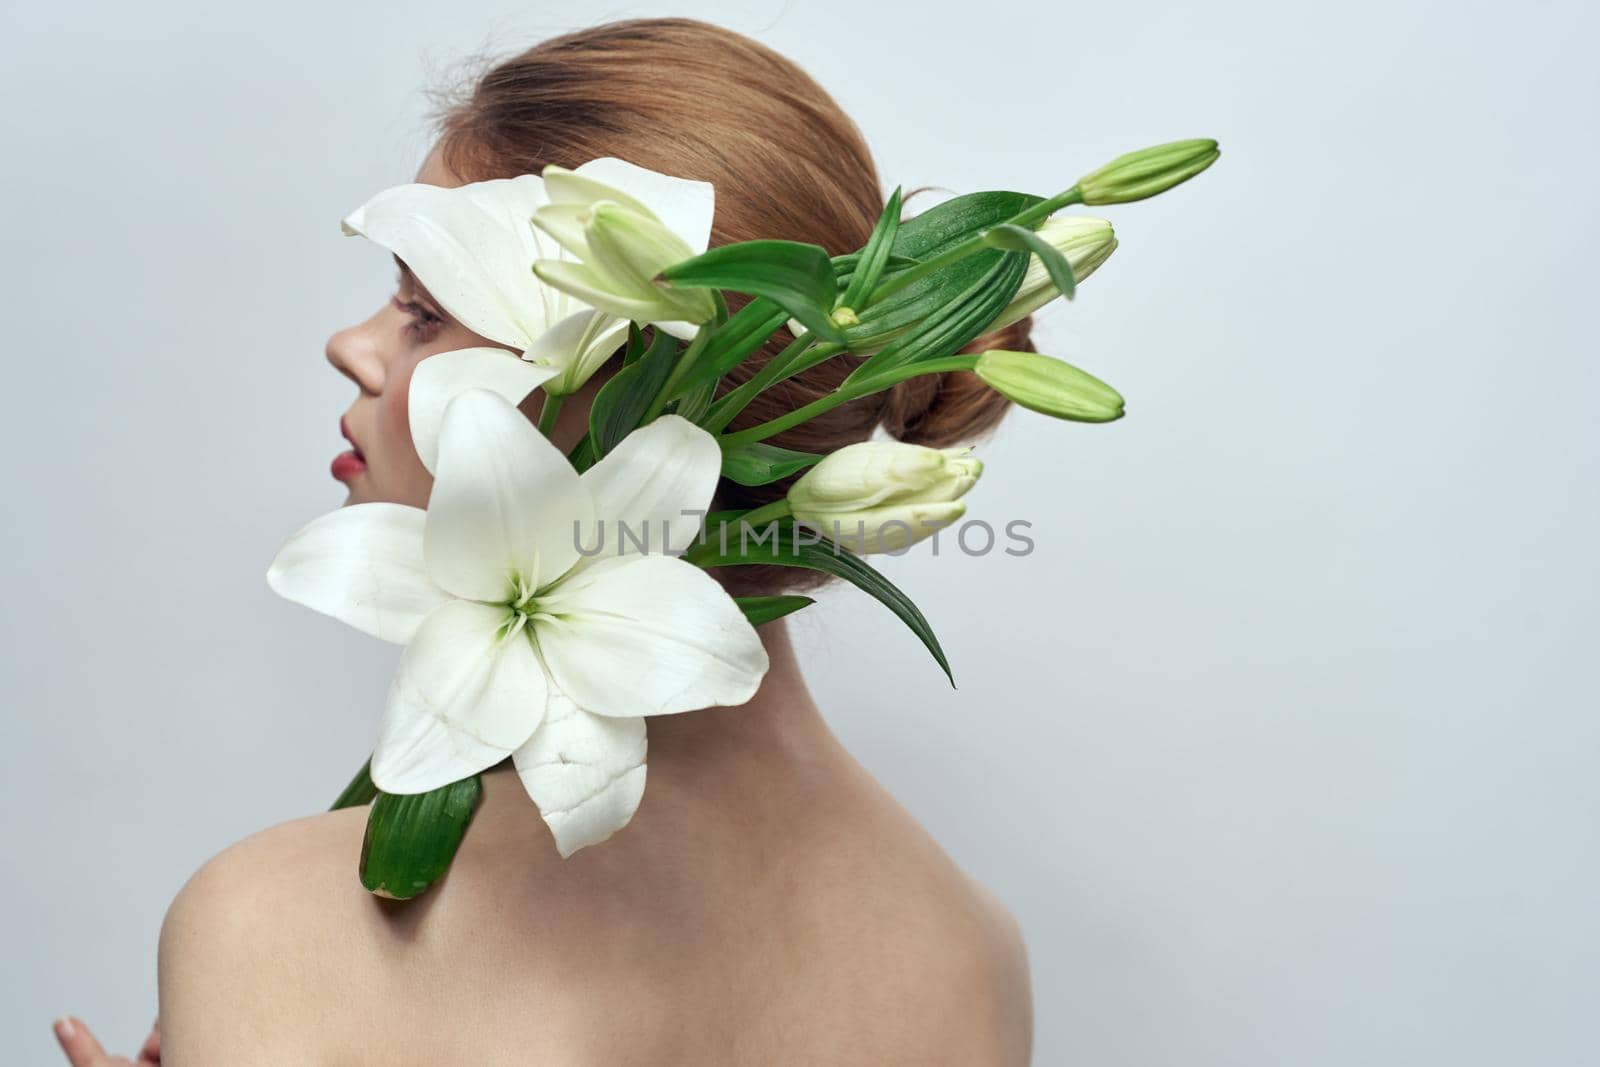 Lady with a bouquet of white flowers on a gray background portrait cropped view close-up by SHOTPRIME